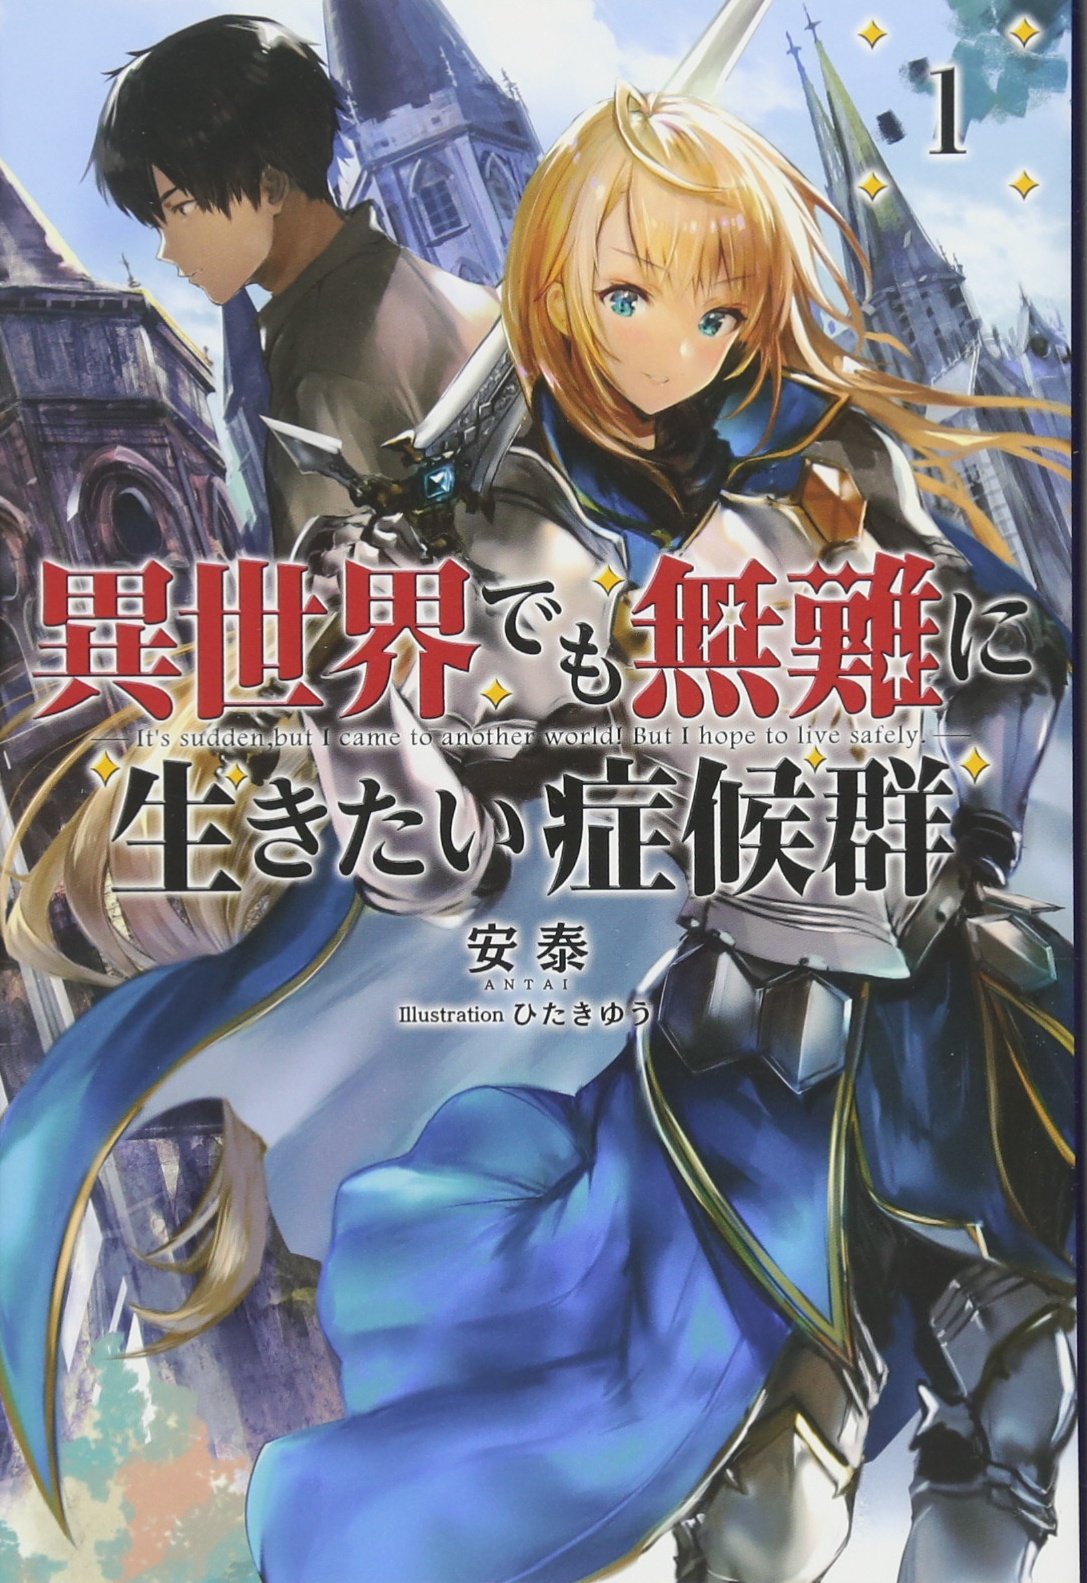 OreNobe! Have I seriously been Isekai'd into a harem light novel with a  ridiculously long title…?